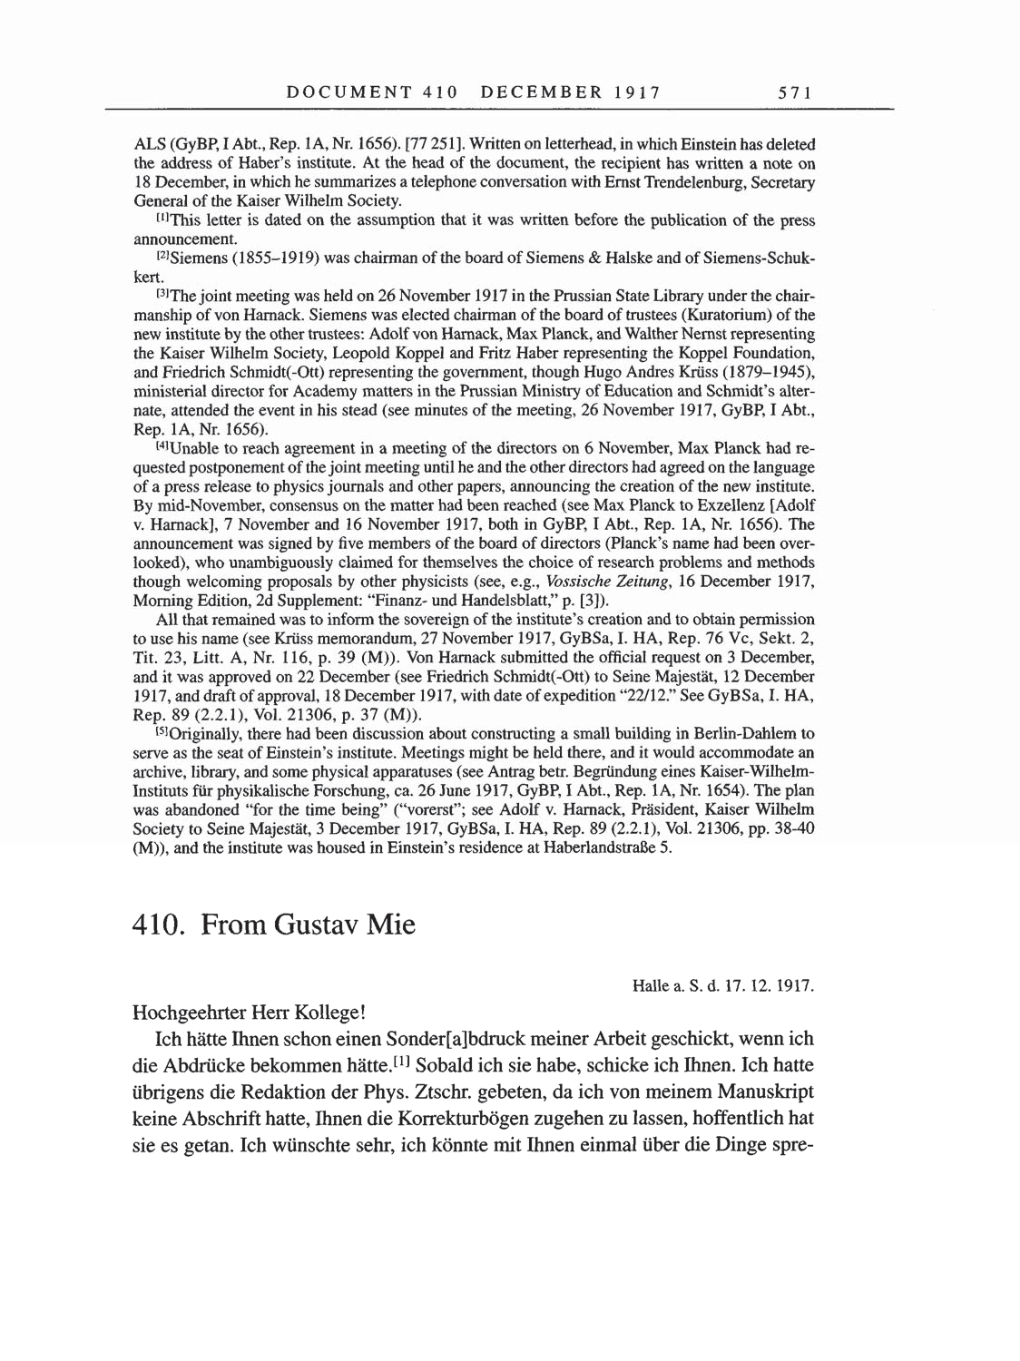 Volume 8, Part A: The Berlin Years: Correspondence 1914-1917 page 571